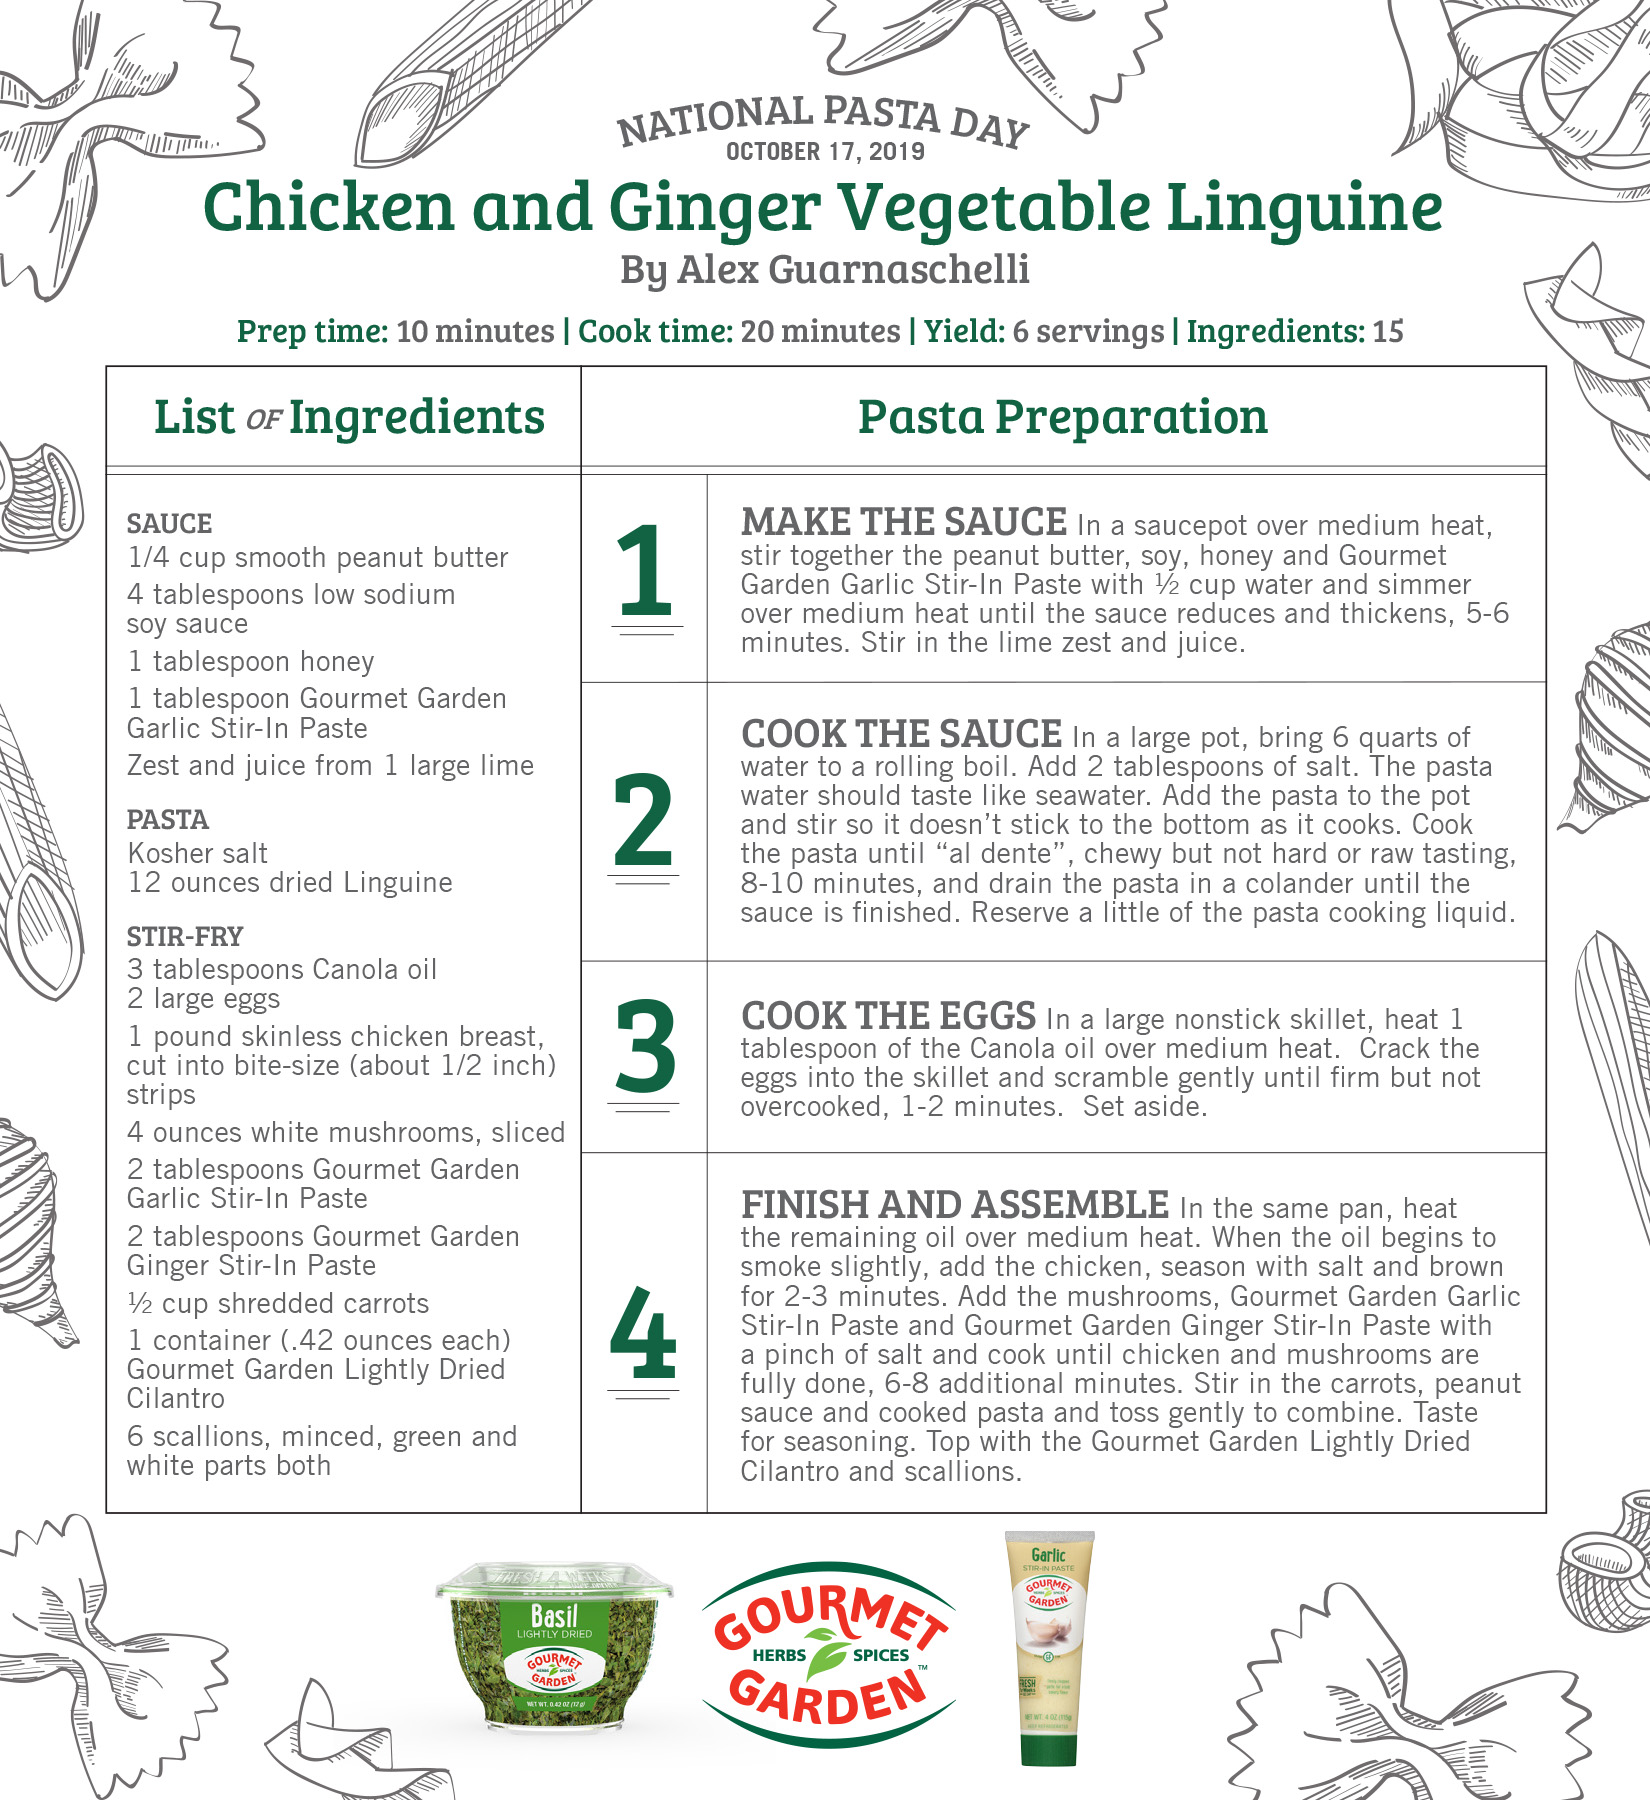 Chicken and Ginger Vegetable Linguine Recipe Created by Chef Alex Guarnaschelli